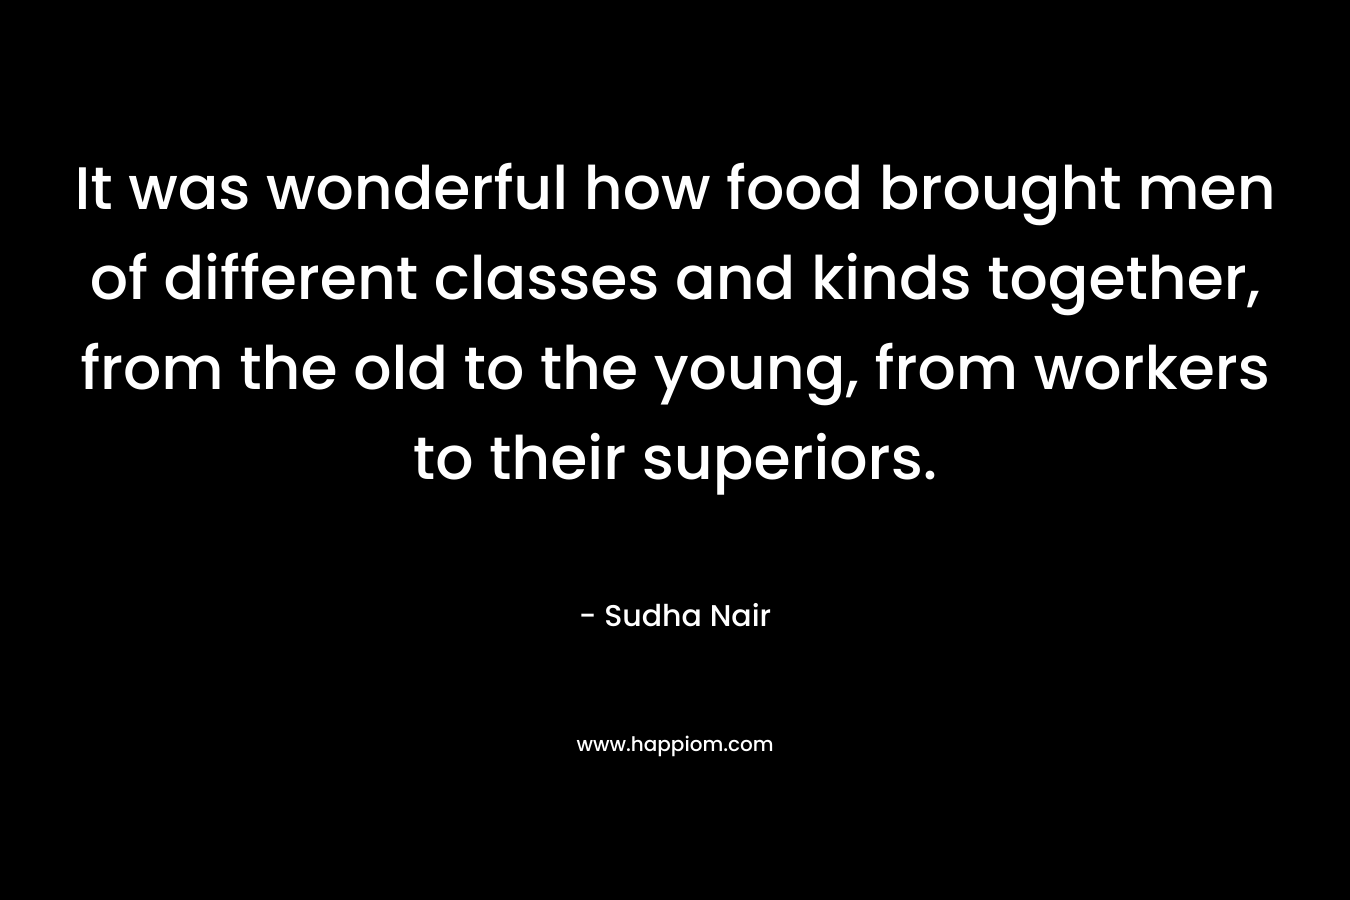 It was wonderful how food brought men of different classes and kinds together, from the old to the young, from workers to their superiors. – Sudha Nair